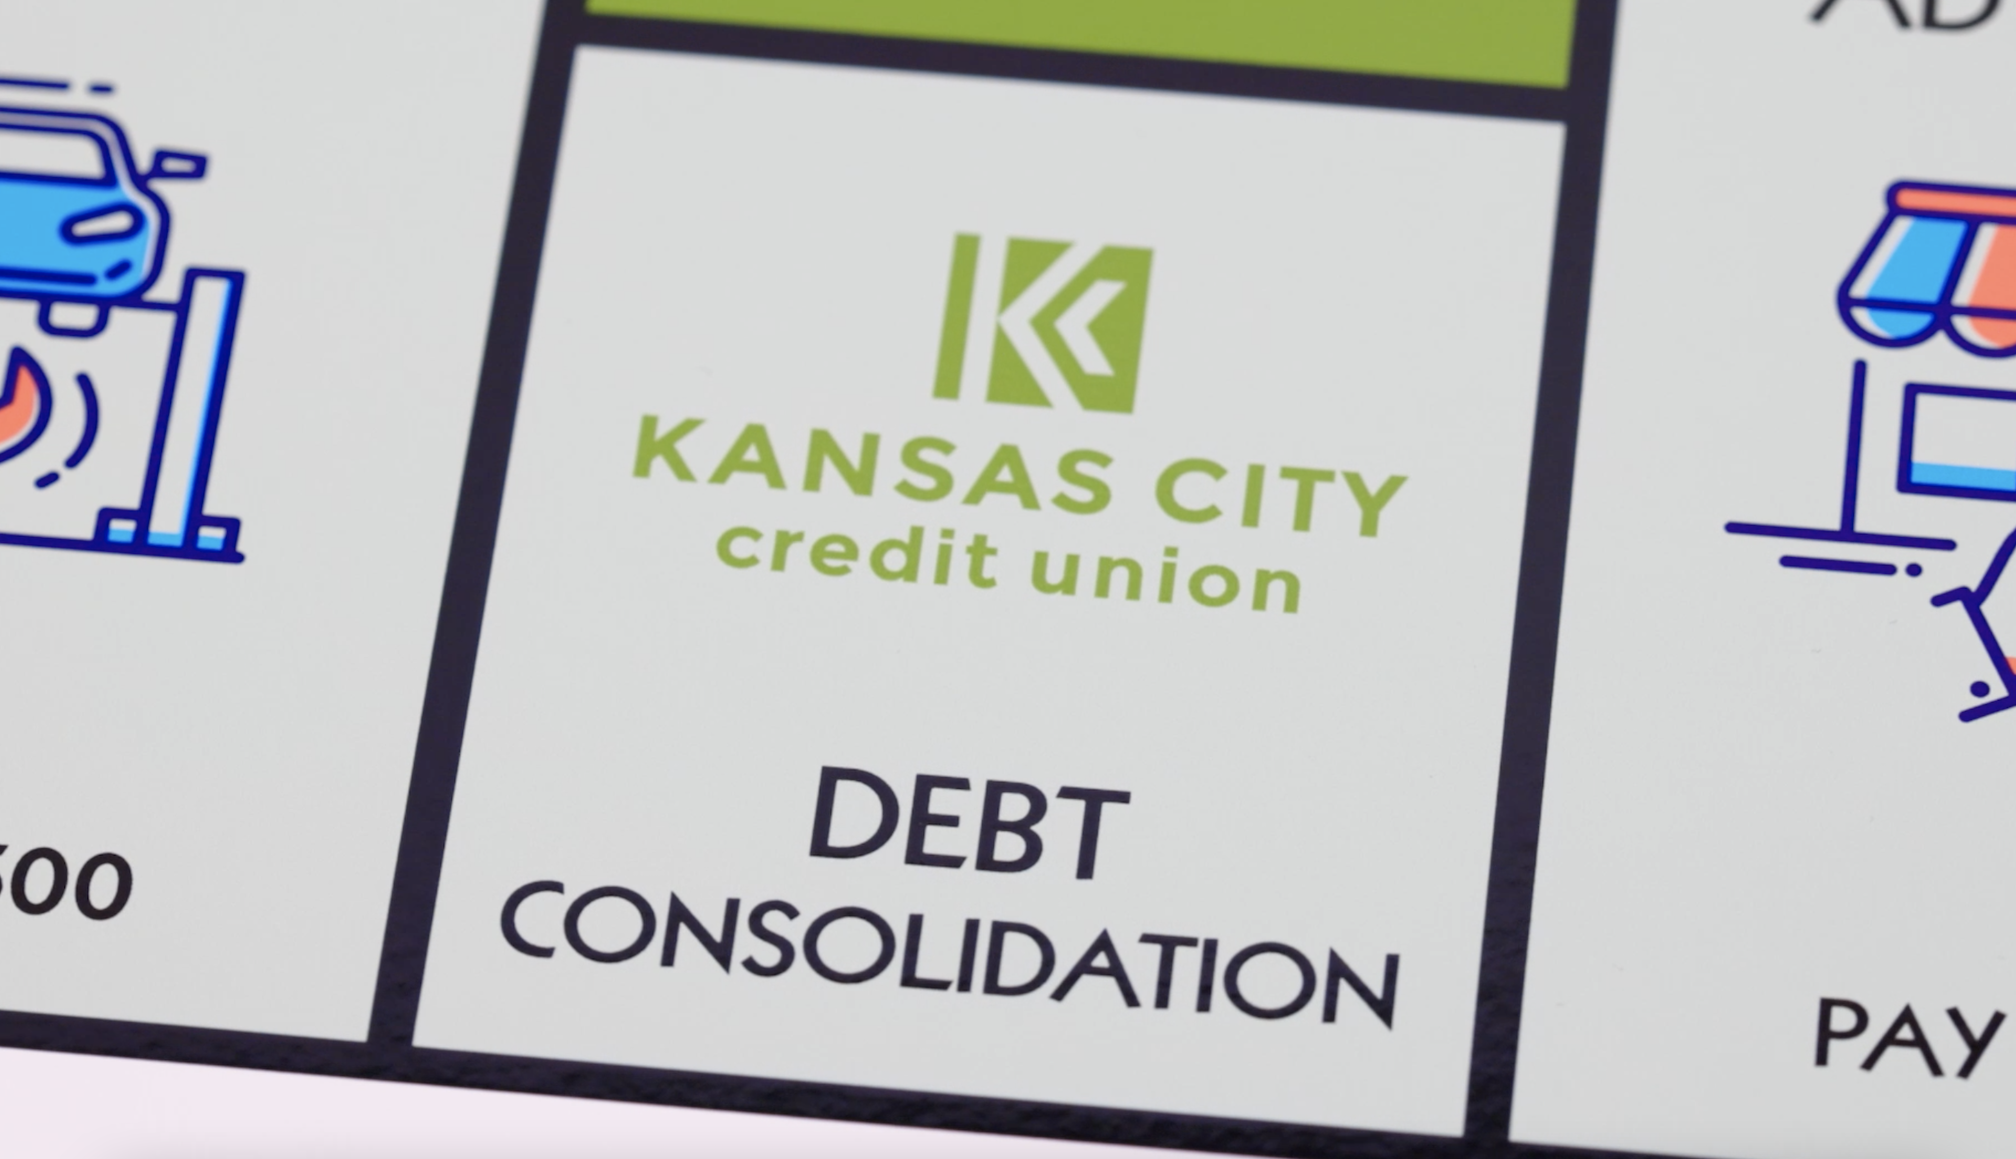 Strategies for Debt Consolidation